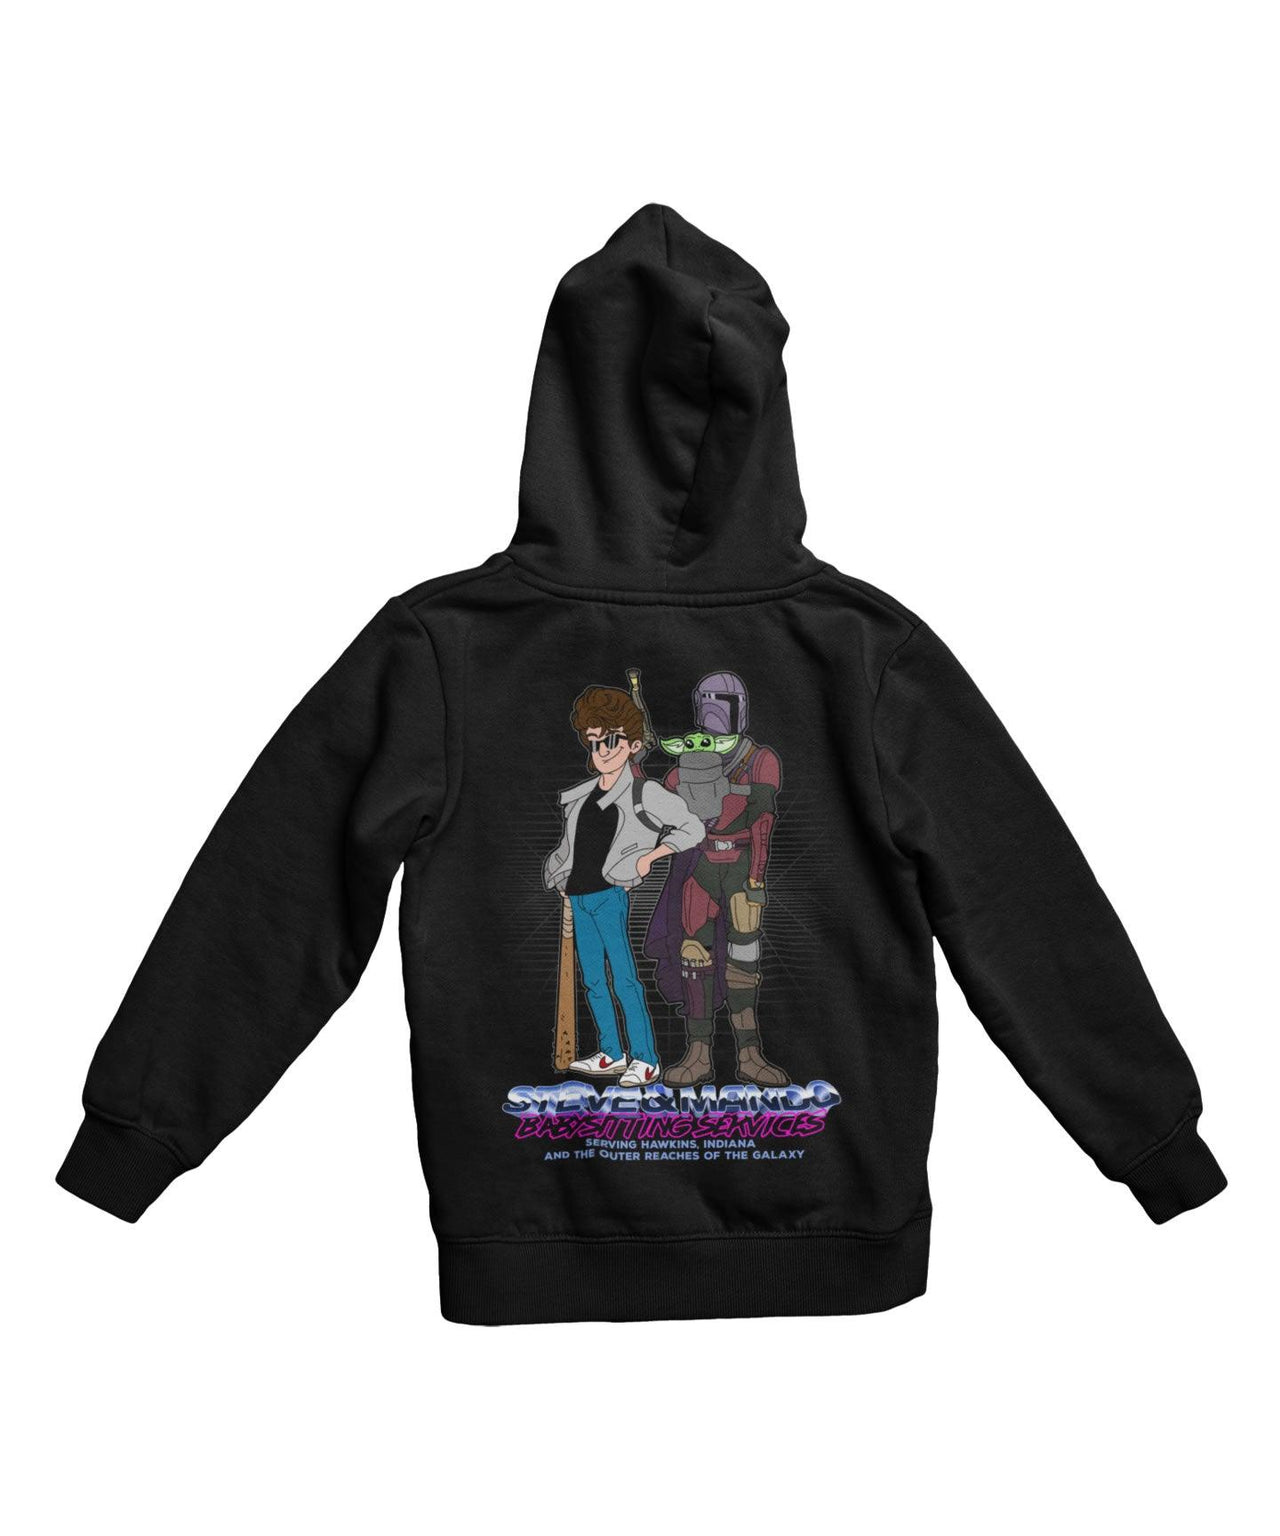 Top Notchy Steve and Mando Babsitting Back Printed Hoodie For Men and Women 8Ball